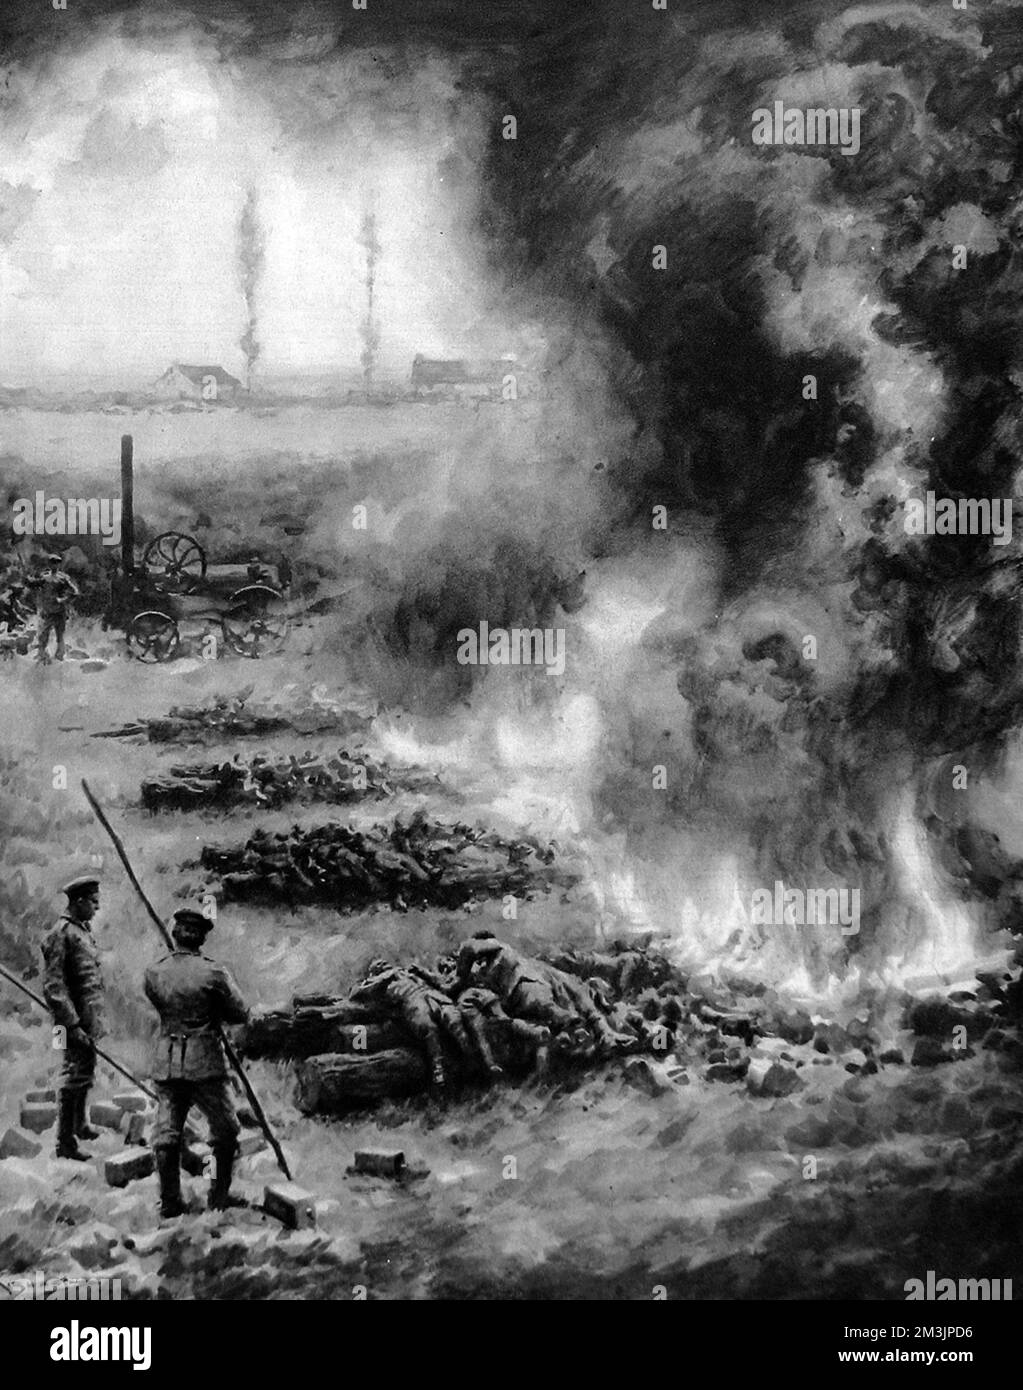 German troops cremating their dead at Esternay, after the Battle of the Marne in September 1914. It is estimated that the Germans suffered losses of 250,000 during the battle, with the French suffering similar numbers. Stock Photo